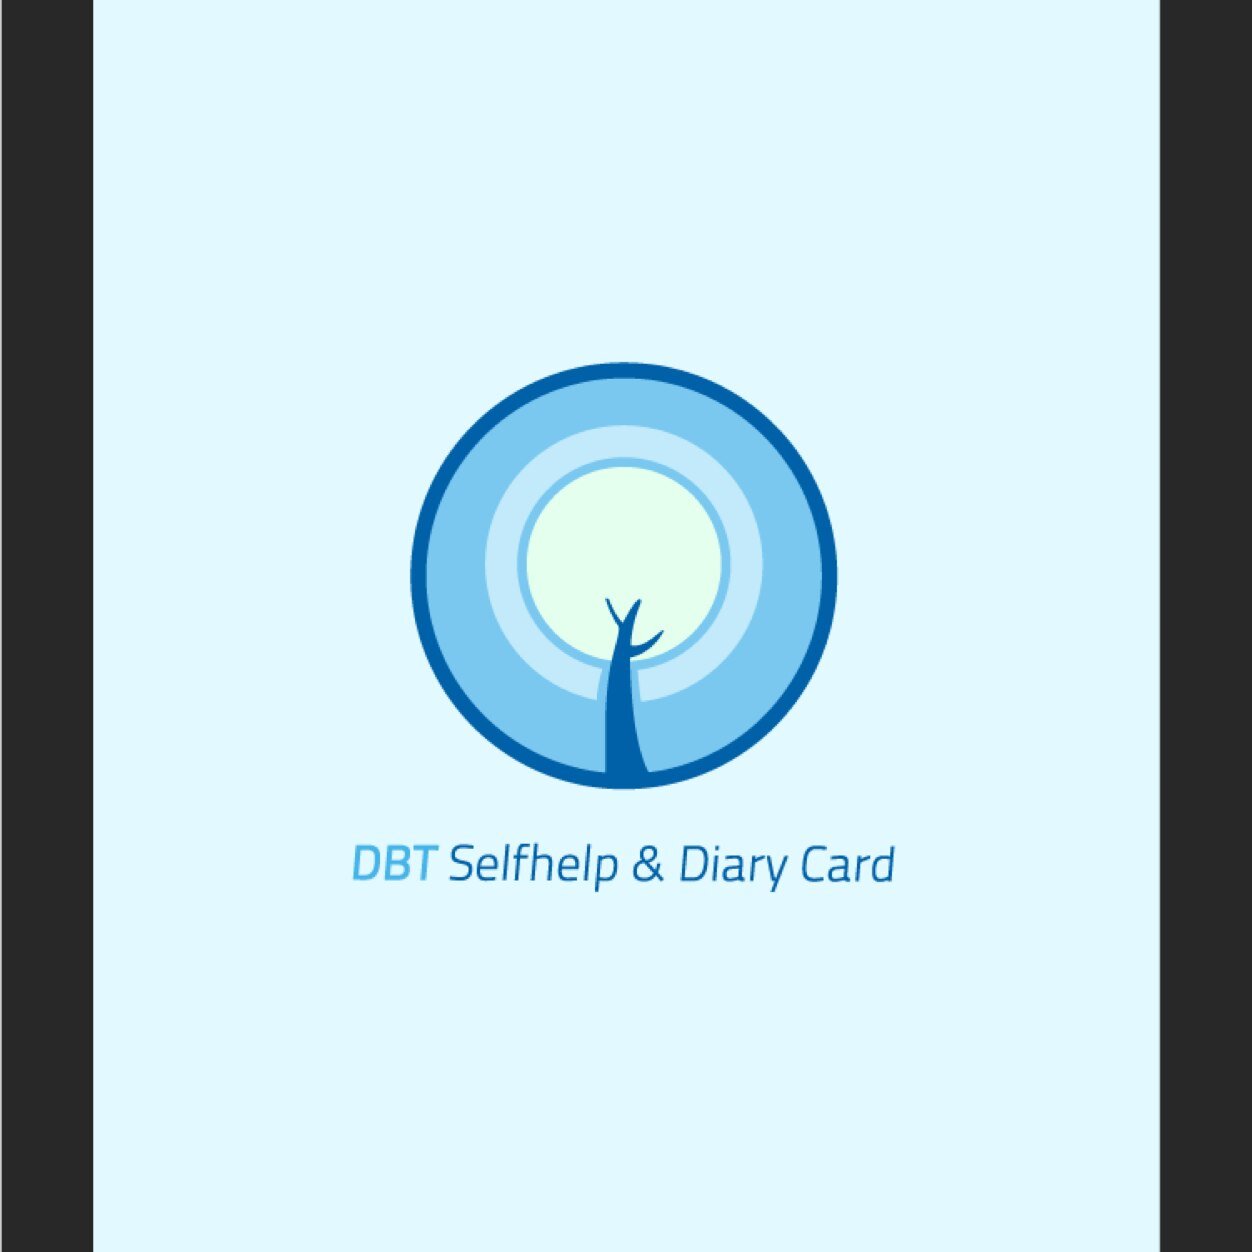 DBT Selfhelp & Diary Card app on Google Play: Tool based on the skills taught in Dialectical Behavior Therapy. #dbt